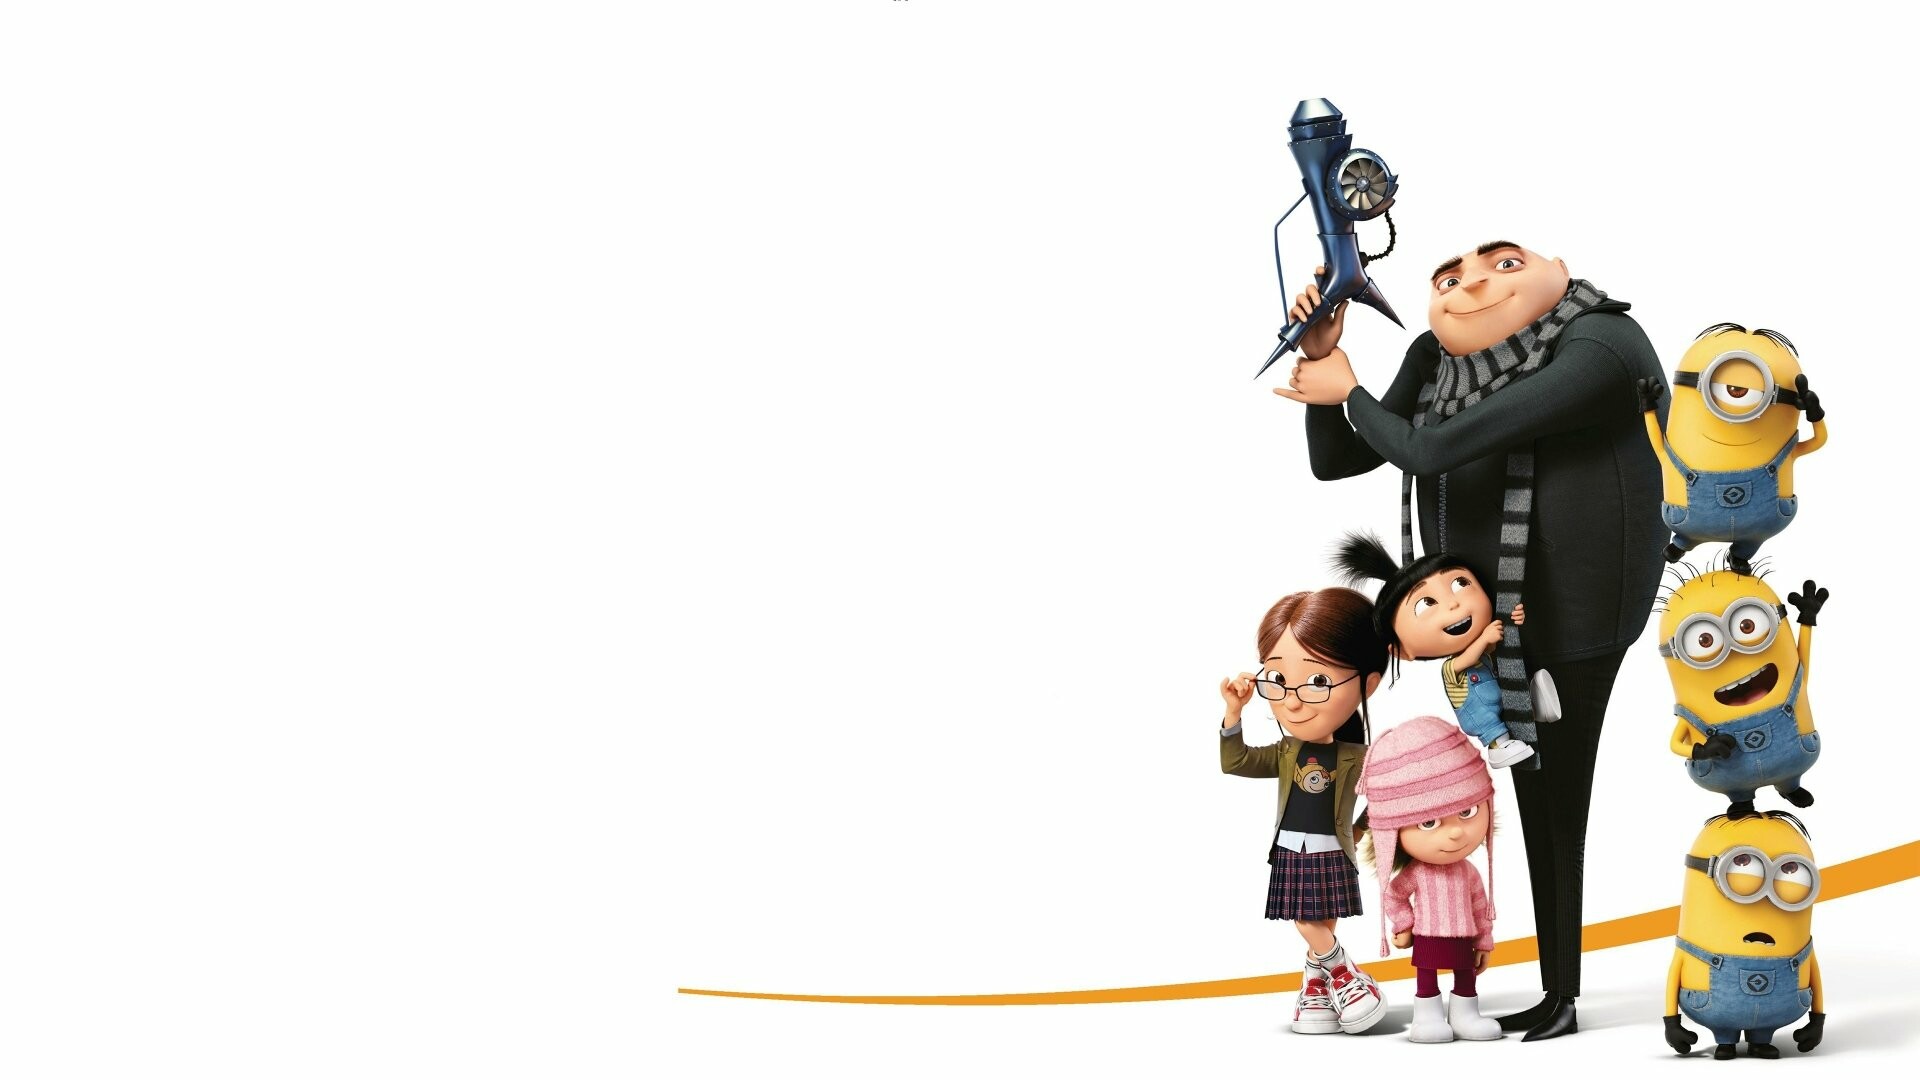 Despicable Me: The film follows a supervillain named Gru as he formulates a plan to steal the Moon, while adopting three orphan girls. 1920x1080 Full HD Wallpaper.